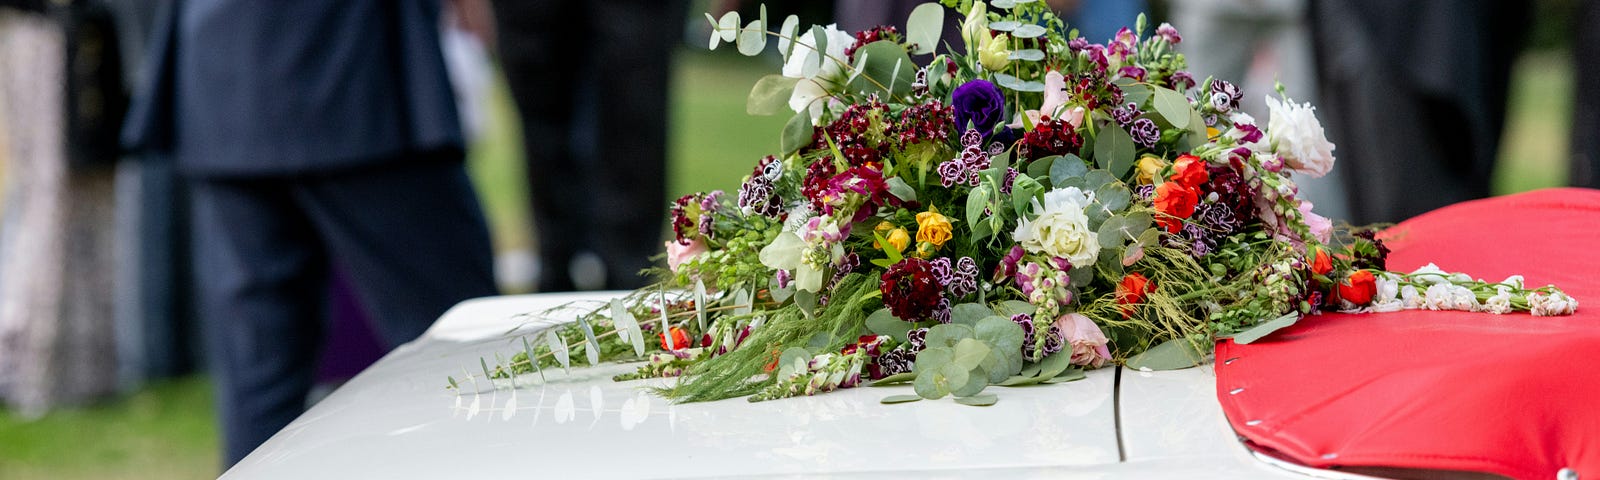 Photograph of a casket at a funeral. Floral arrangement on top. Crowd shown in background.